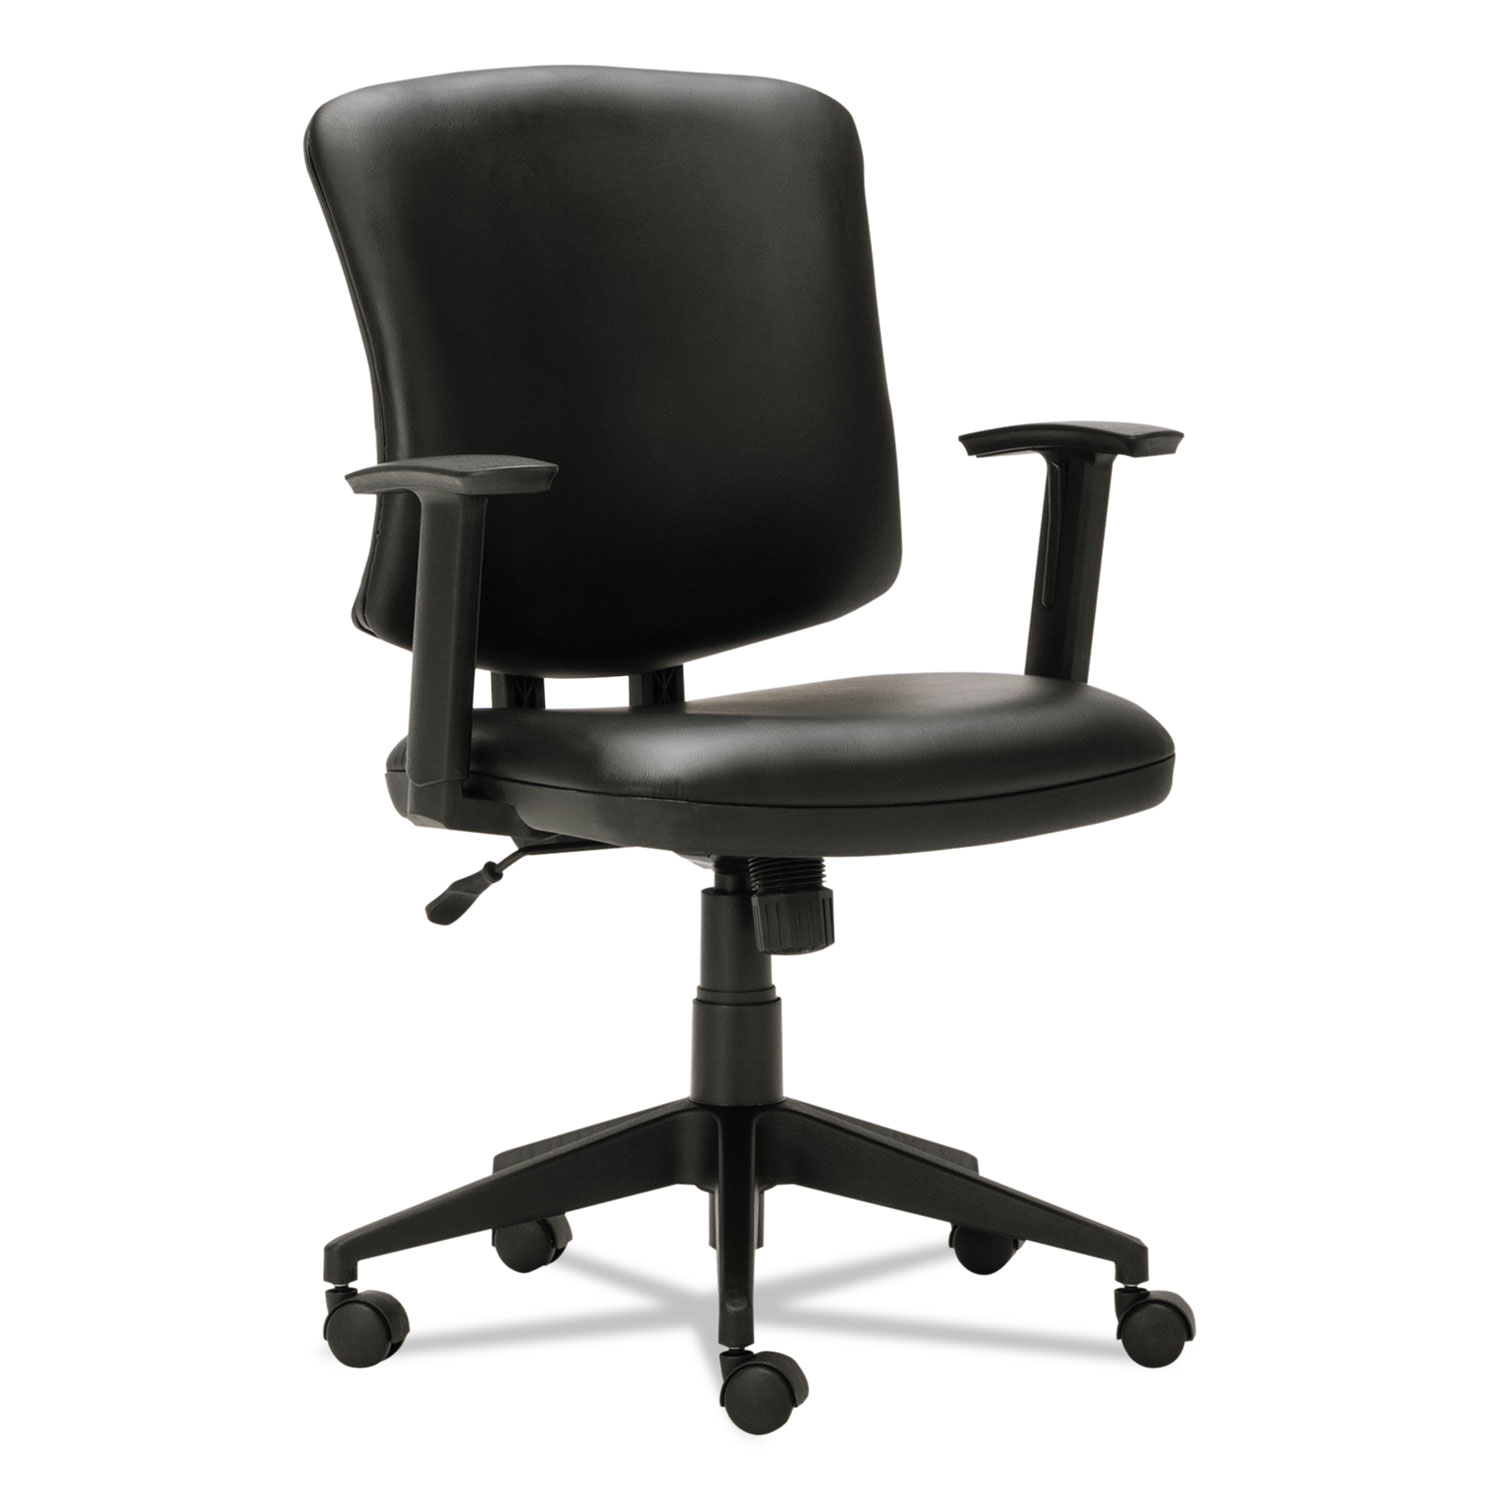  Alera ALETE4819 Everyday Task Office Chair, Supports up to 275 lbs., Black Seat/Black Back, Black Base (ALETE4819) 